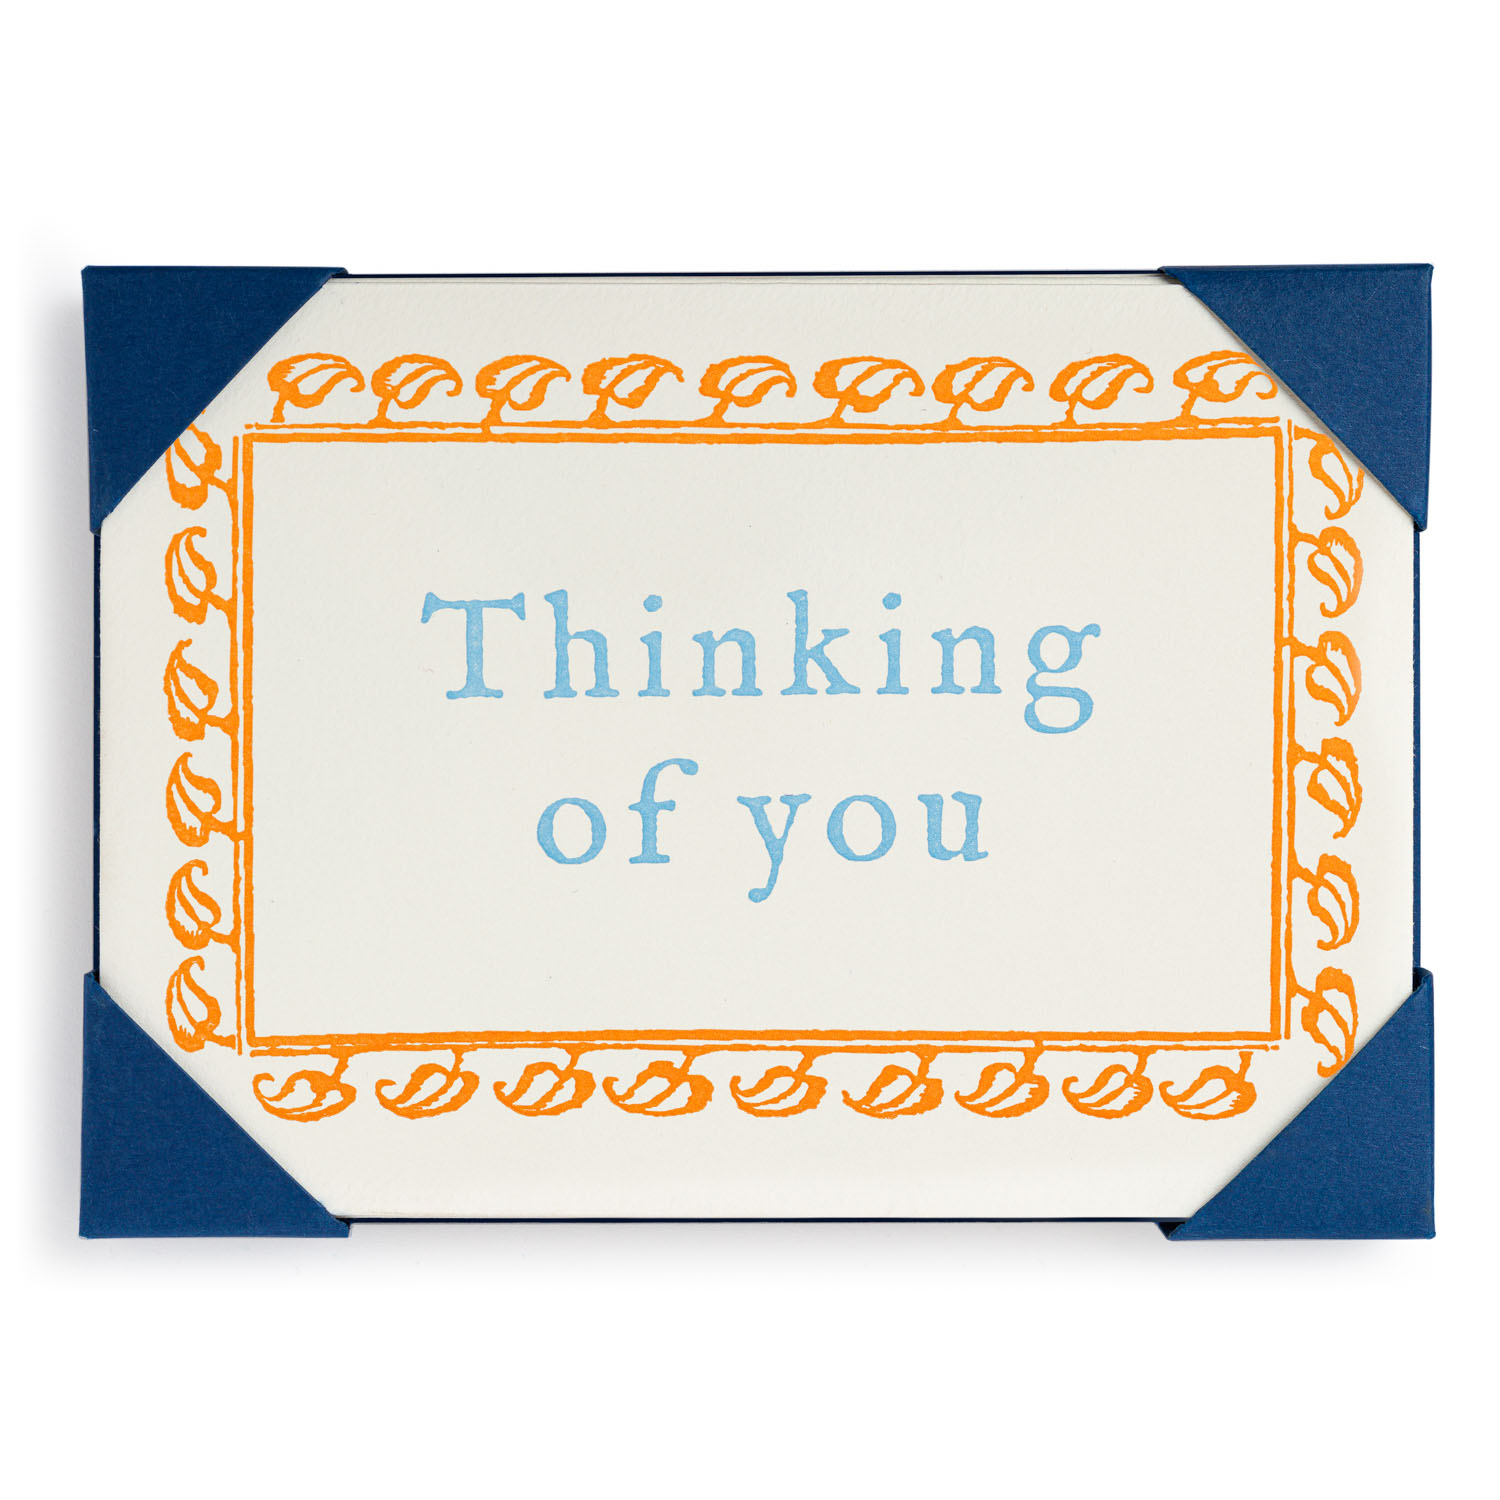 Leafy Thinking of You - Notelets Packs - Ariana Martin - from Archivist Gallery 